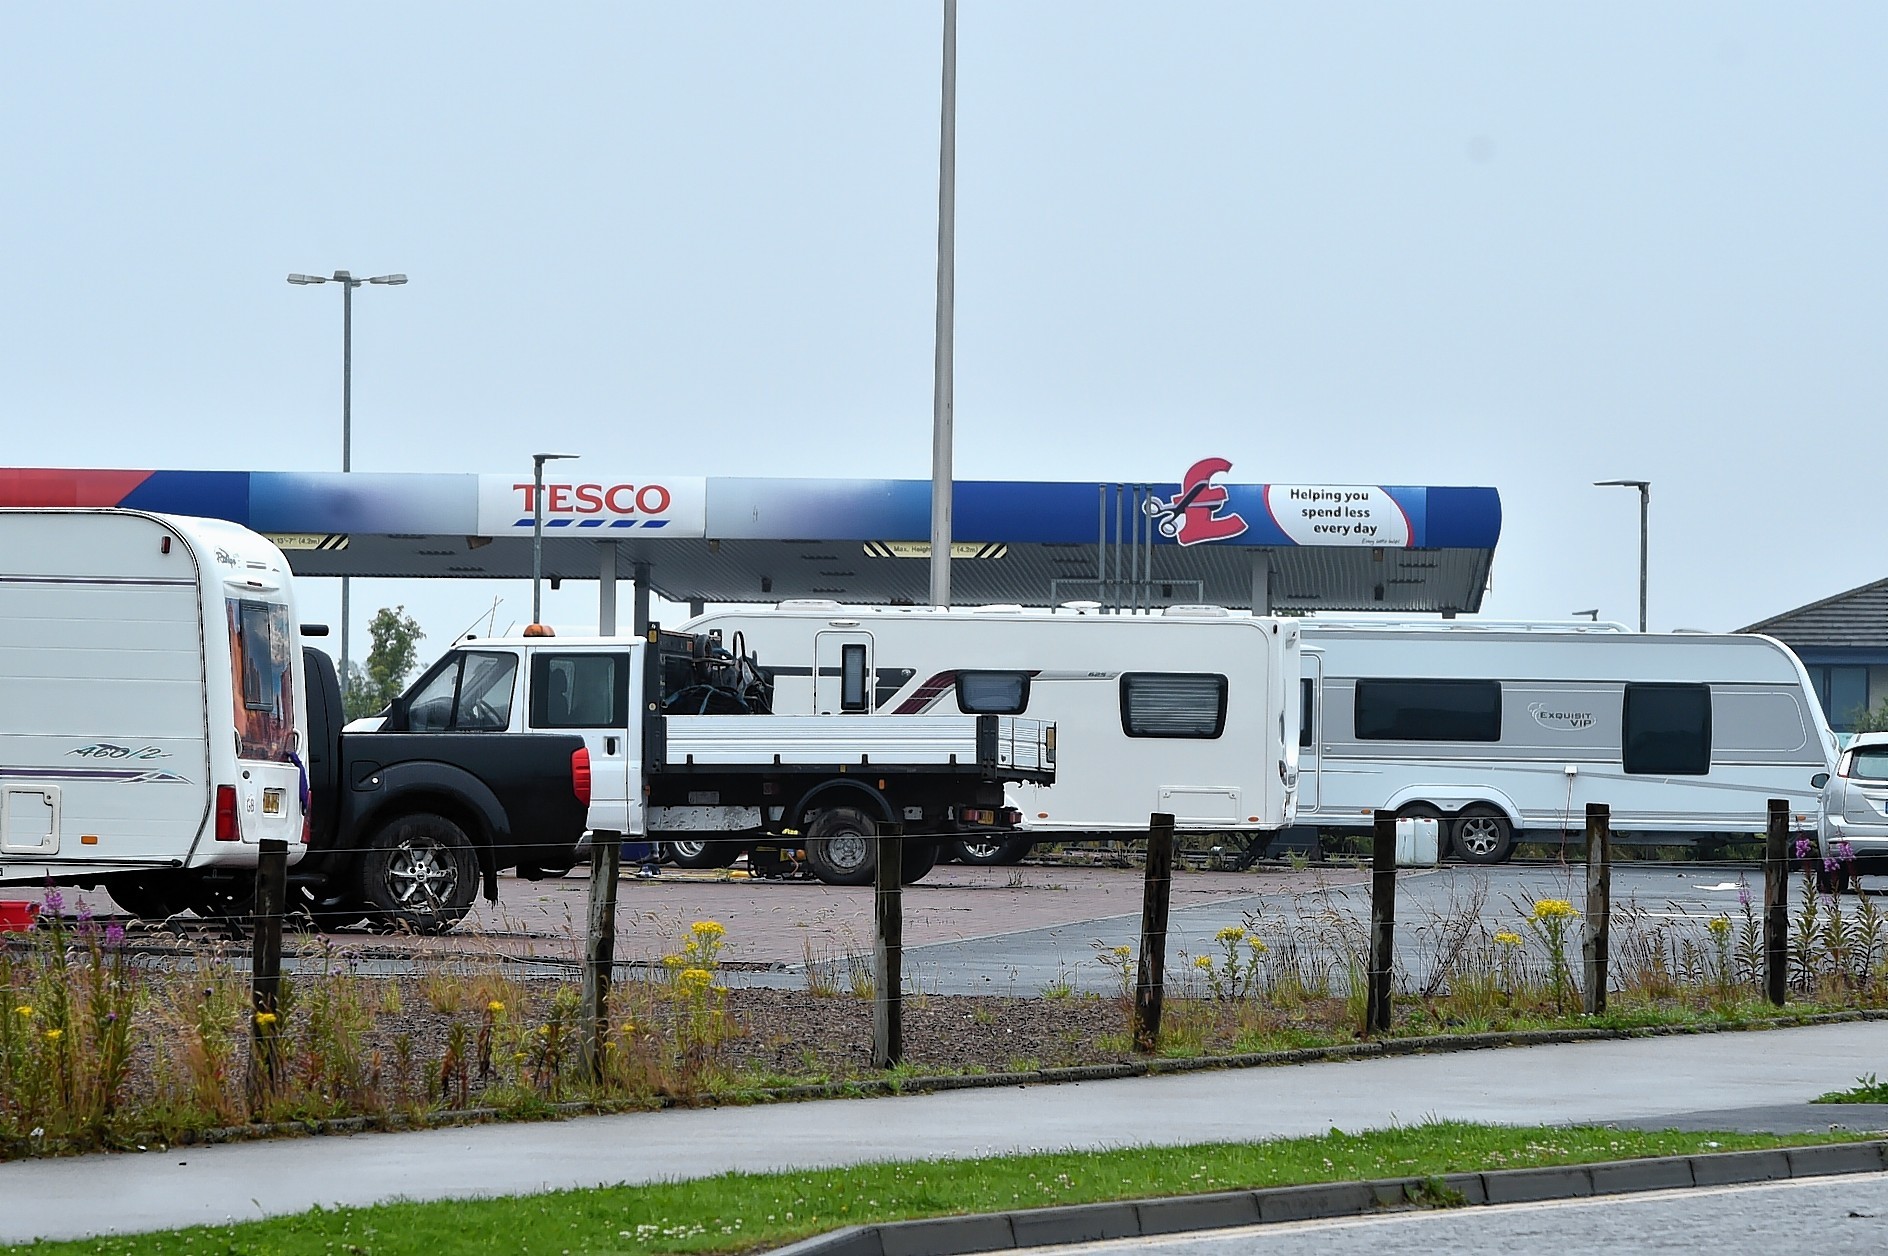 Travellers has pitched up at a car park next to Tesco Petrol station, Prospect Road, Arnhall Business Park, Westhill.